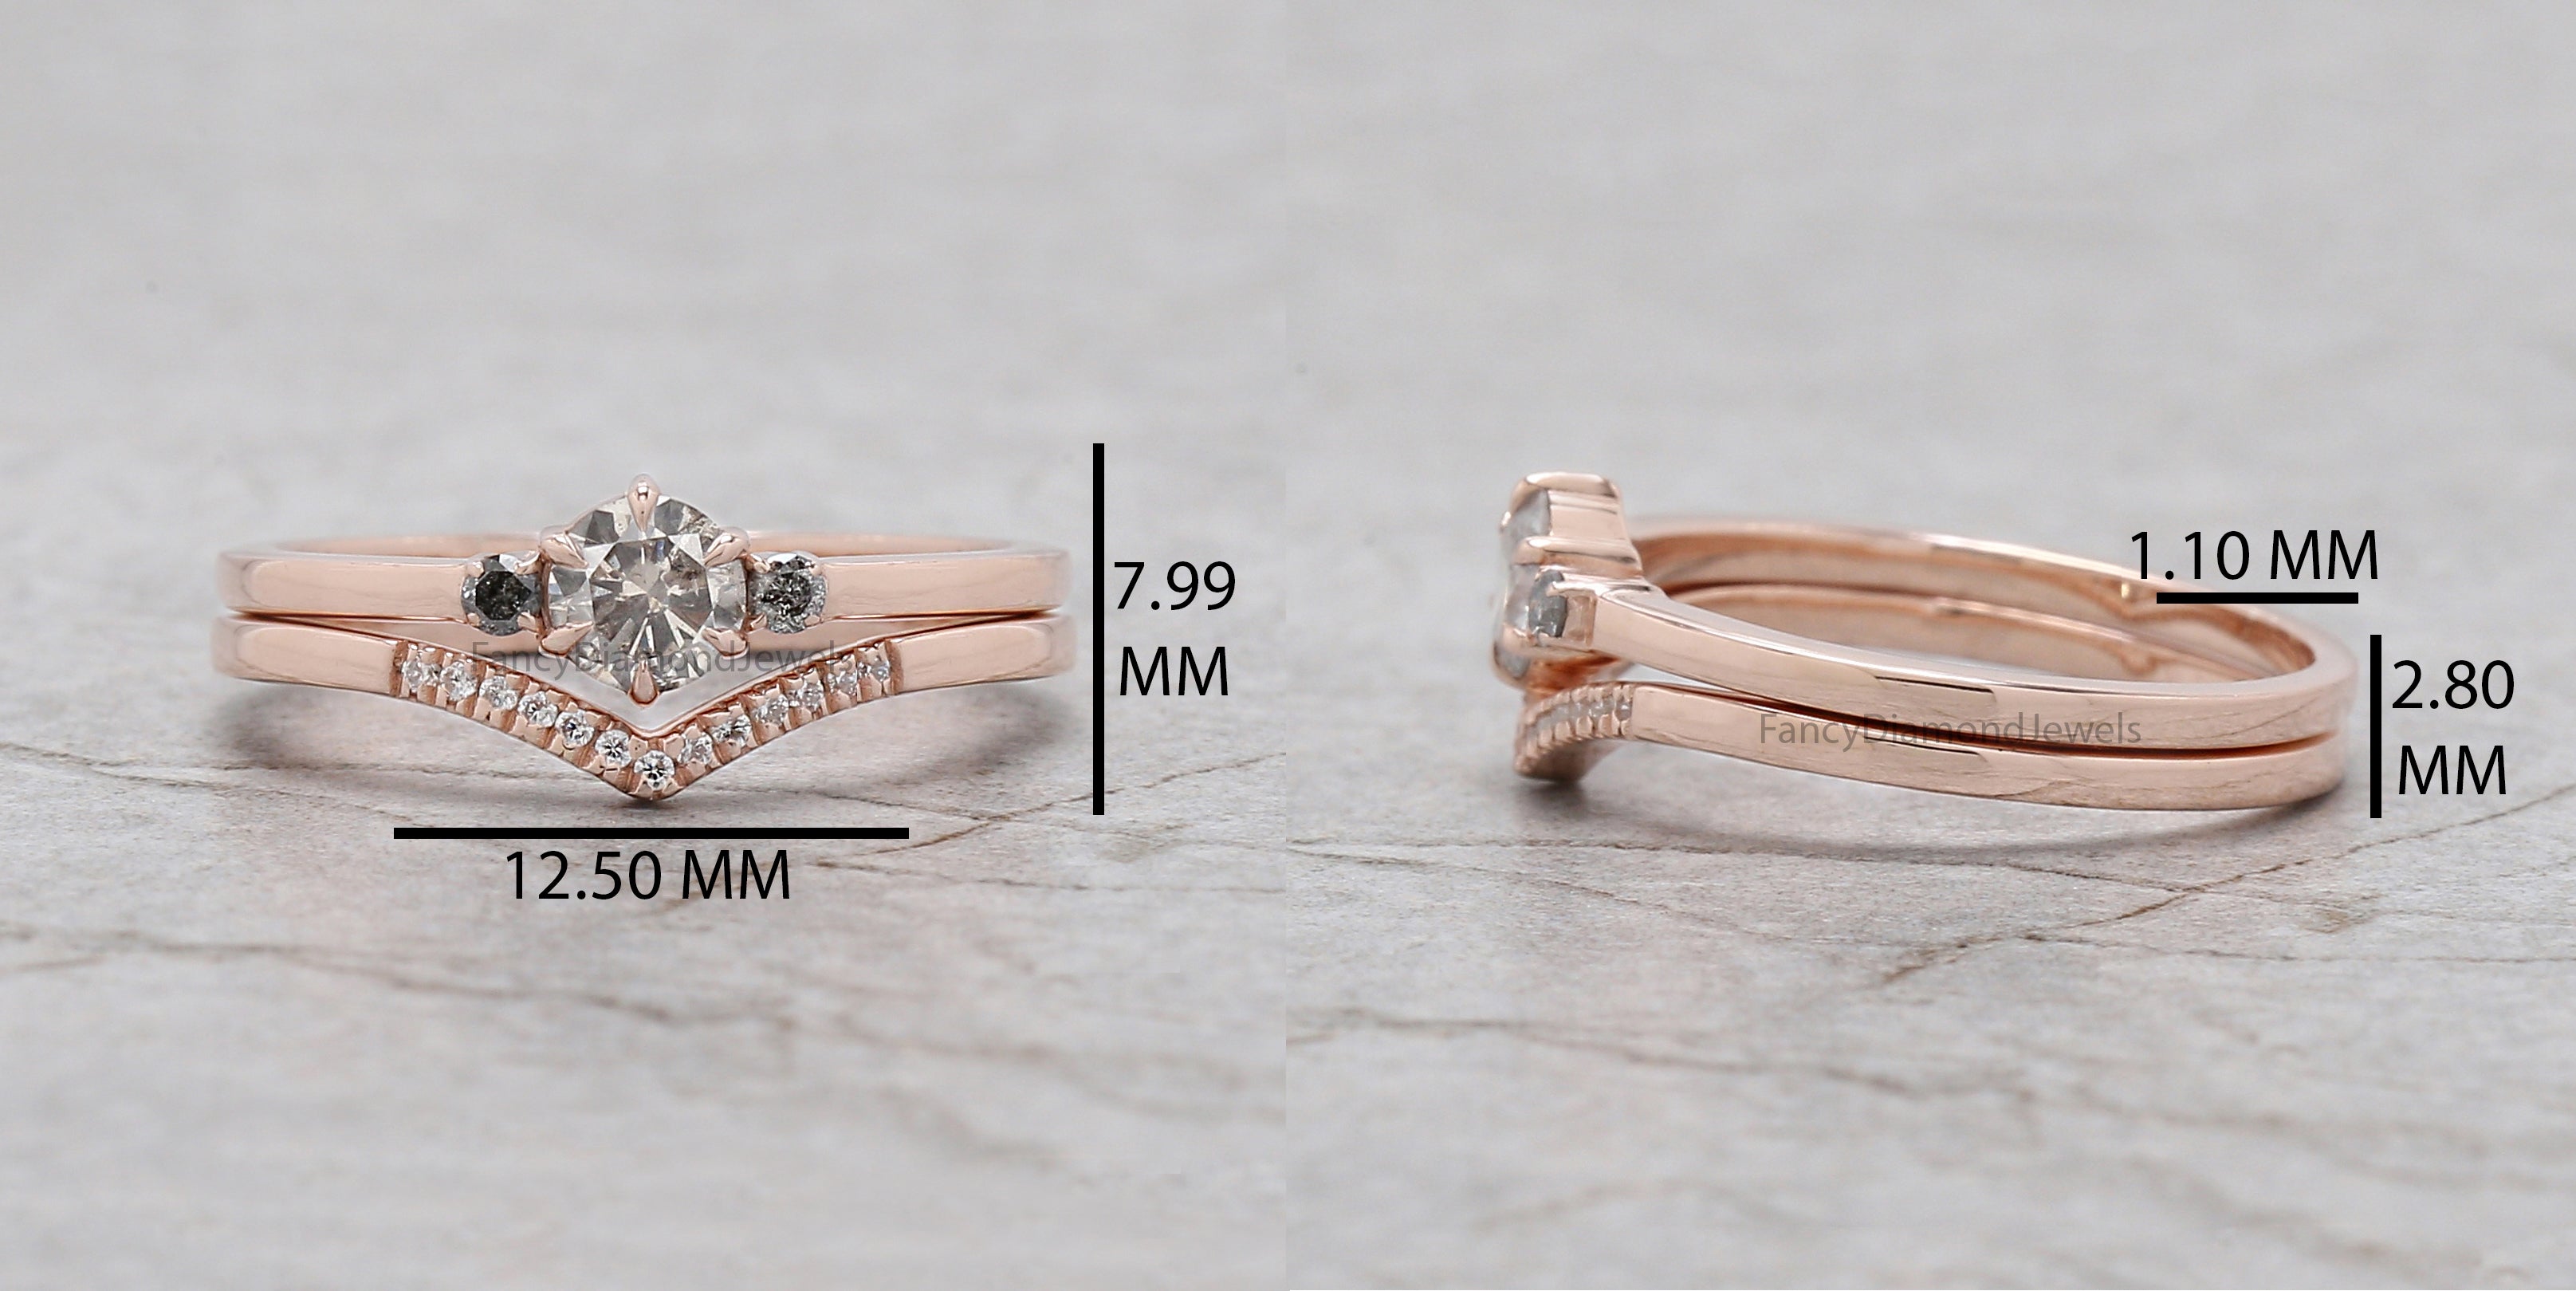 Round Cut Salt And Pepper Diamond Ring 0.32 Ct 4.50 MM Round Diamond Ring 14K Solid Rose Gold Silver Engagement Ring Gift For Her QL7914